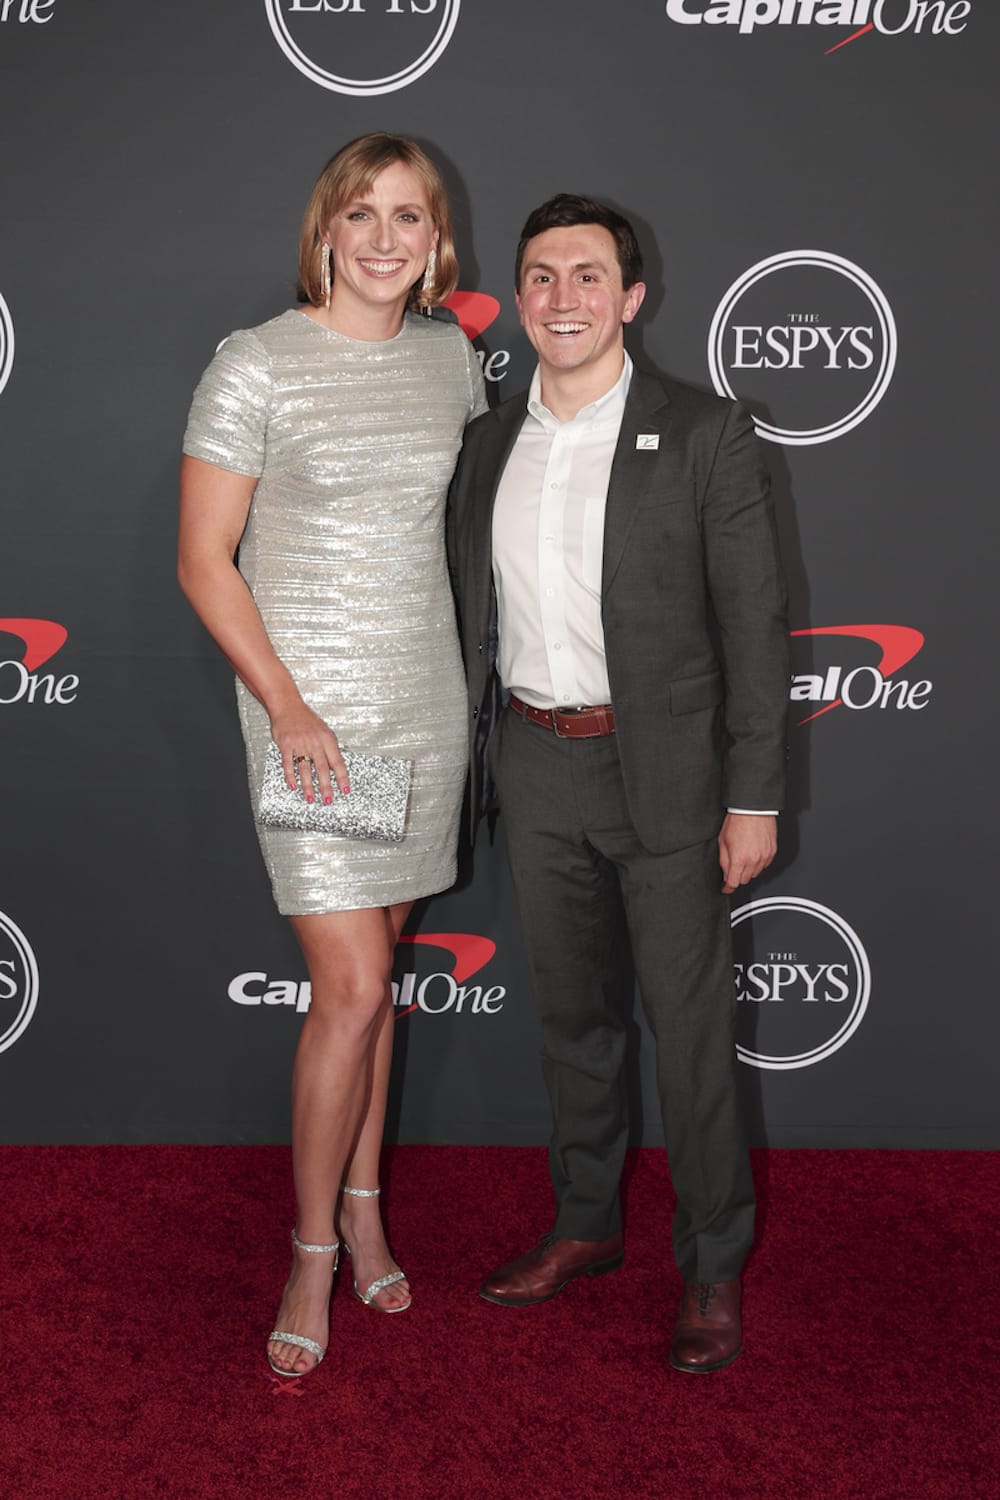 Katie Ledecky with her elder brother Michael Ledecky at the 2022 ESPYs red carpet on July 20th.